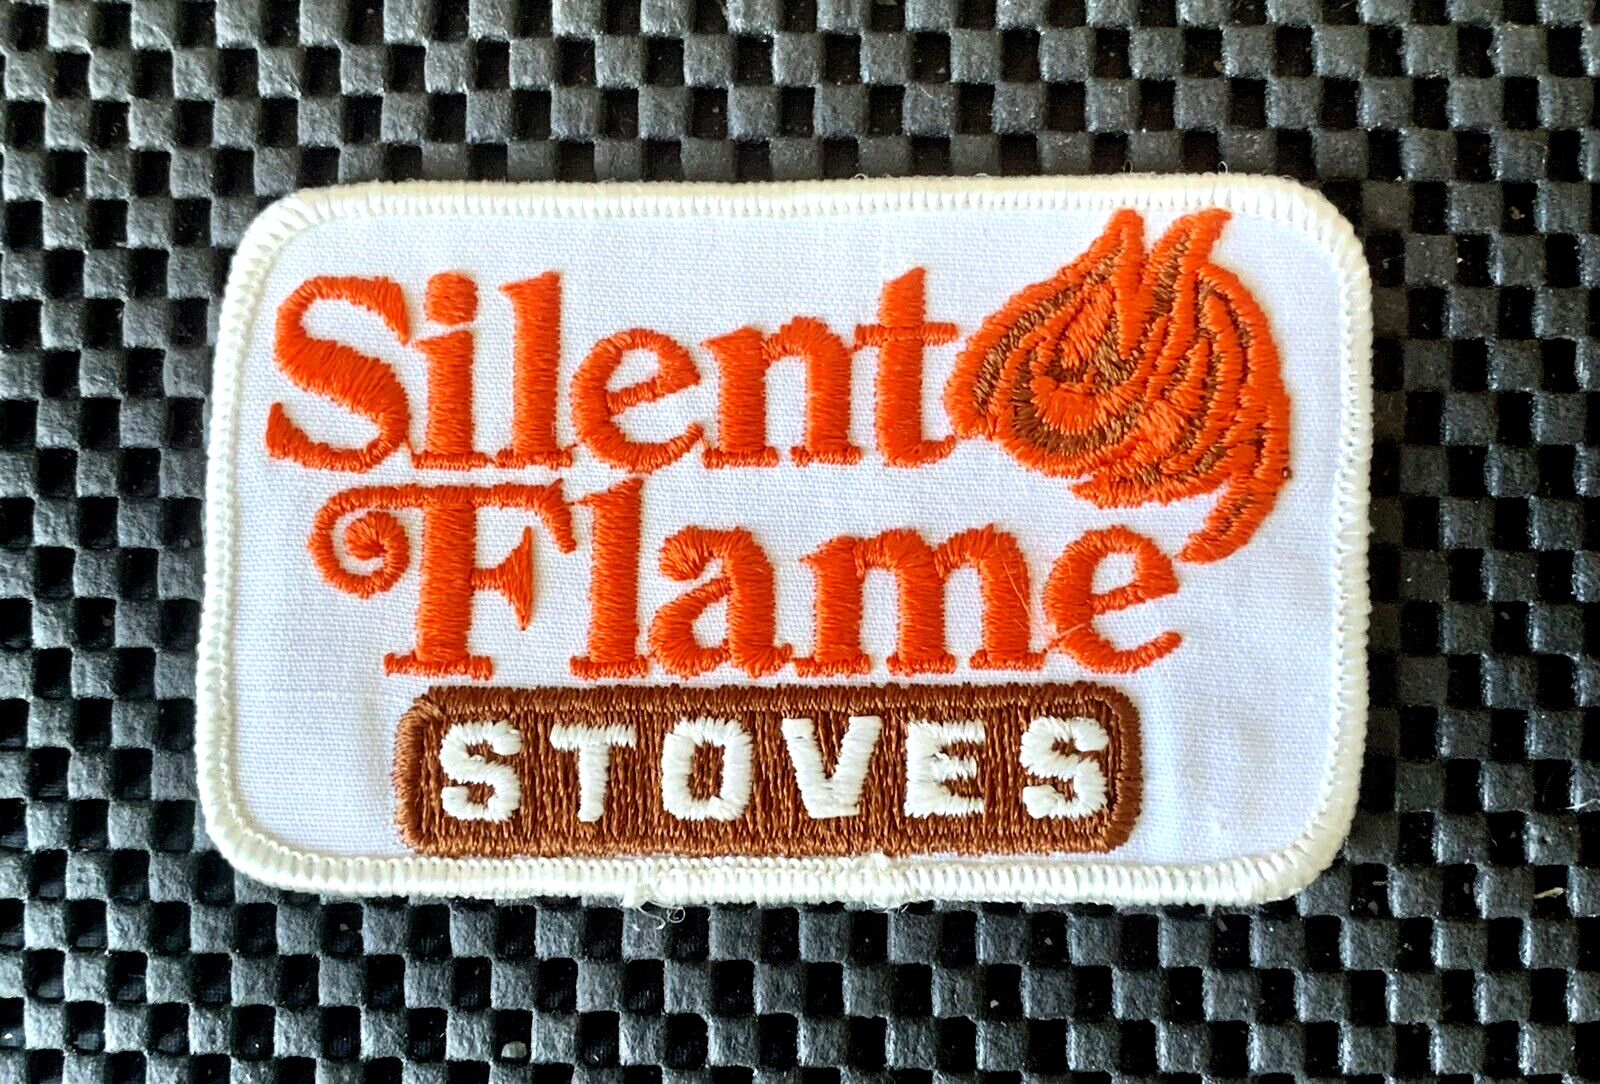 SILENT FLAME STOVES EMBROIDERED SEW ON ONLY PATCH WOOD STOVES 4\